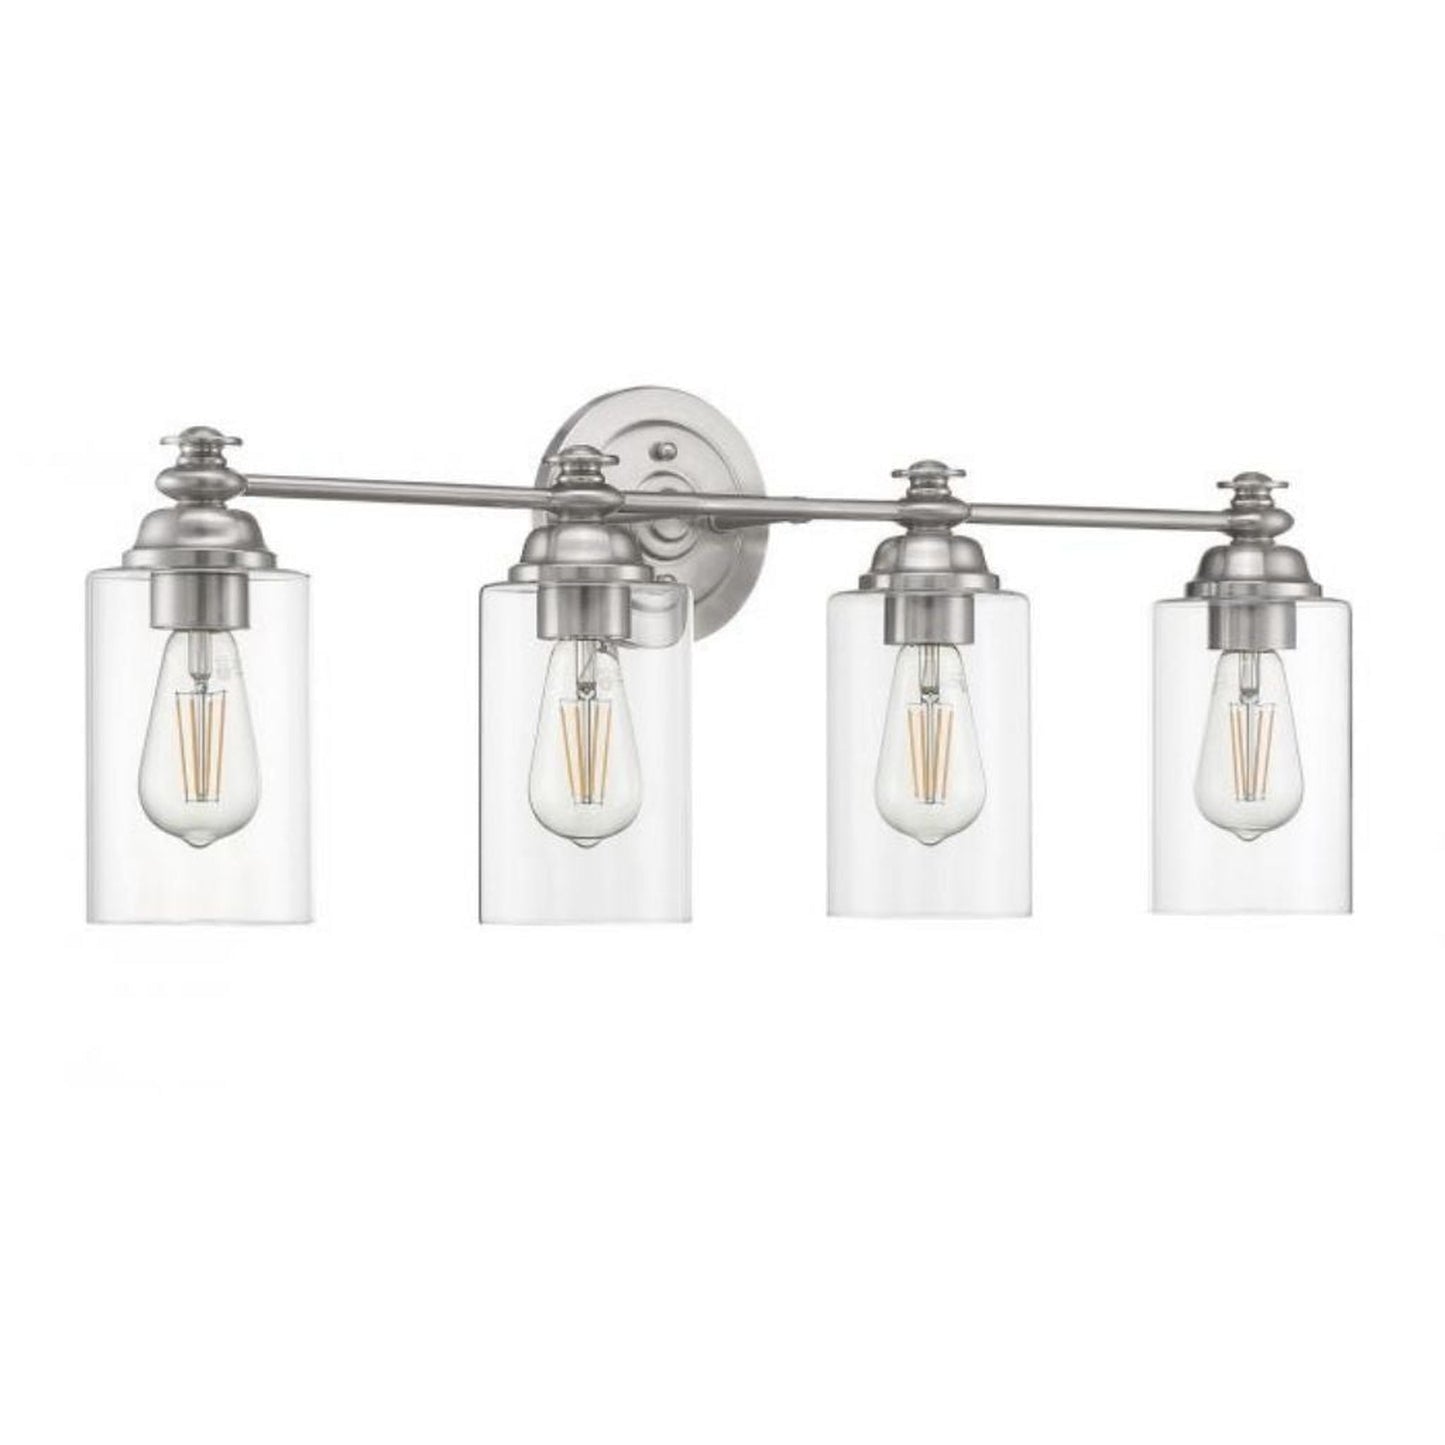 Craftmade Dardyn 30" 4-Light Brushed Polished Nickel Vanity Light With Clear Glass Shades